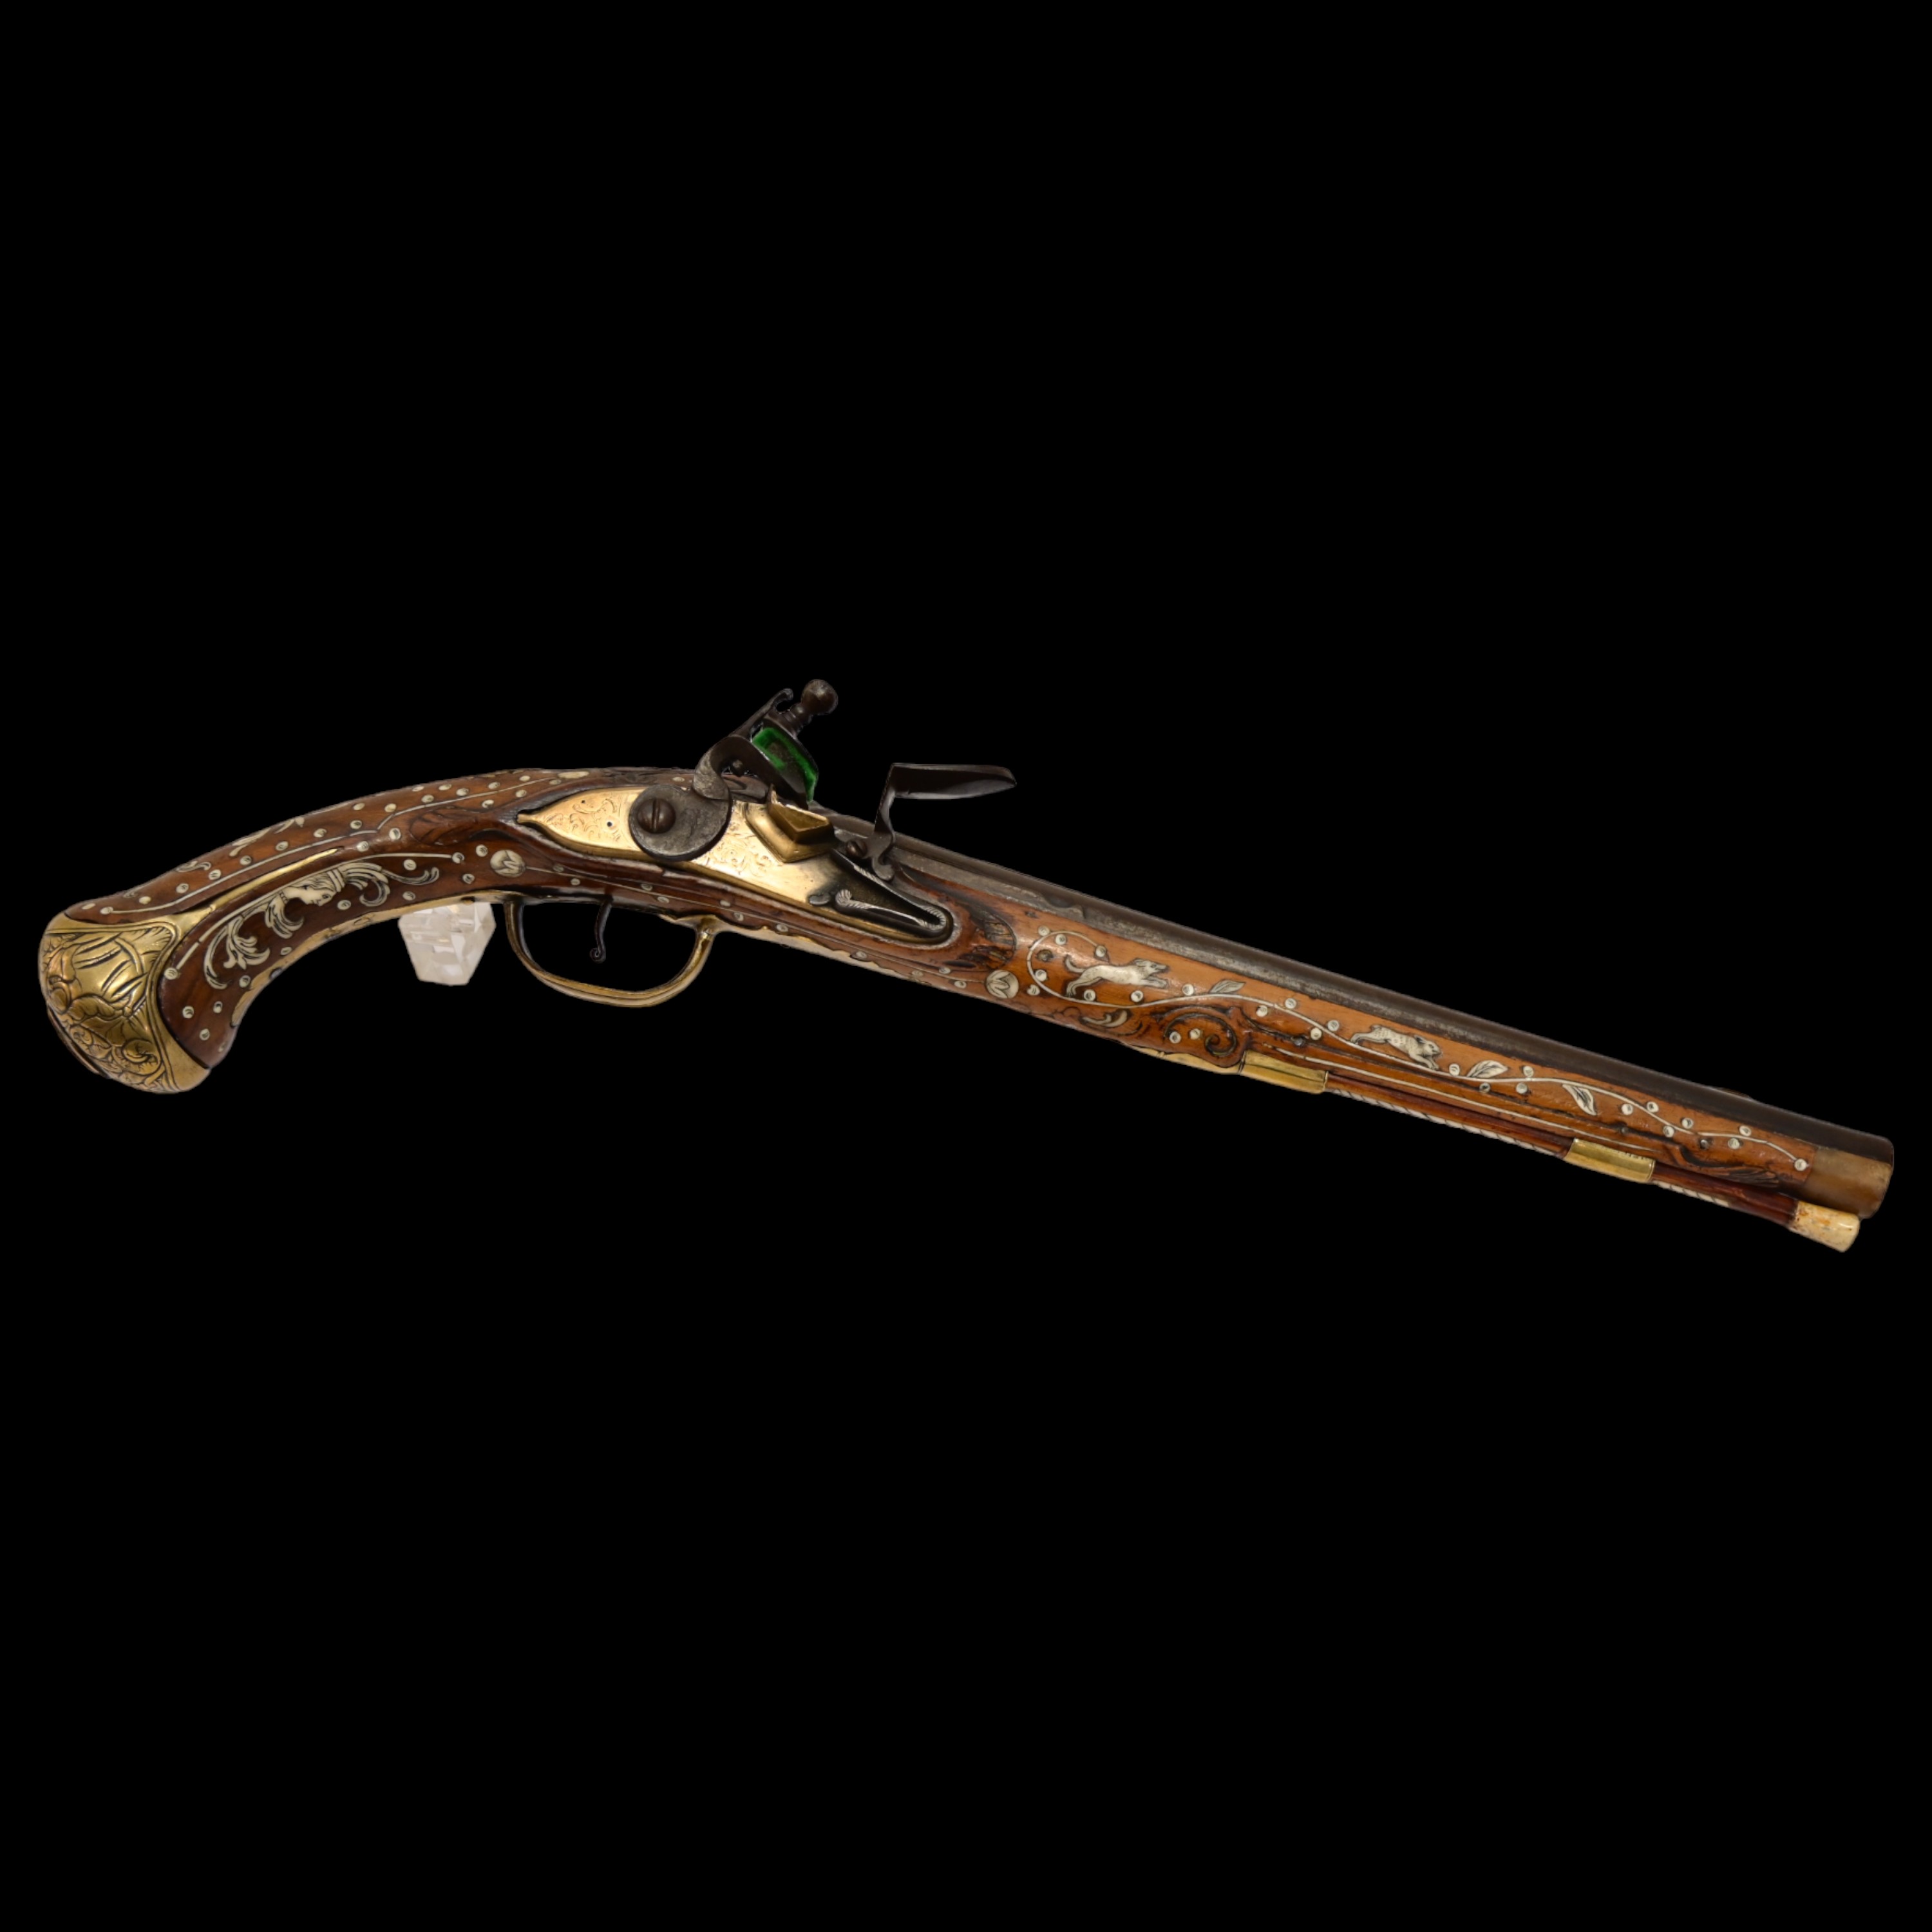 Rare, Richly decorated with inlay, flintlock pistol, Germany, last quarter of the 17th century. - Image 2 of 12